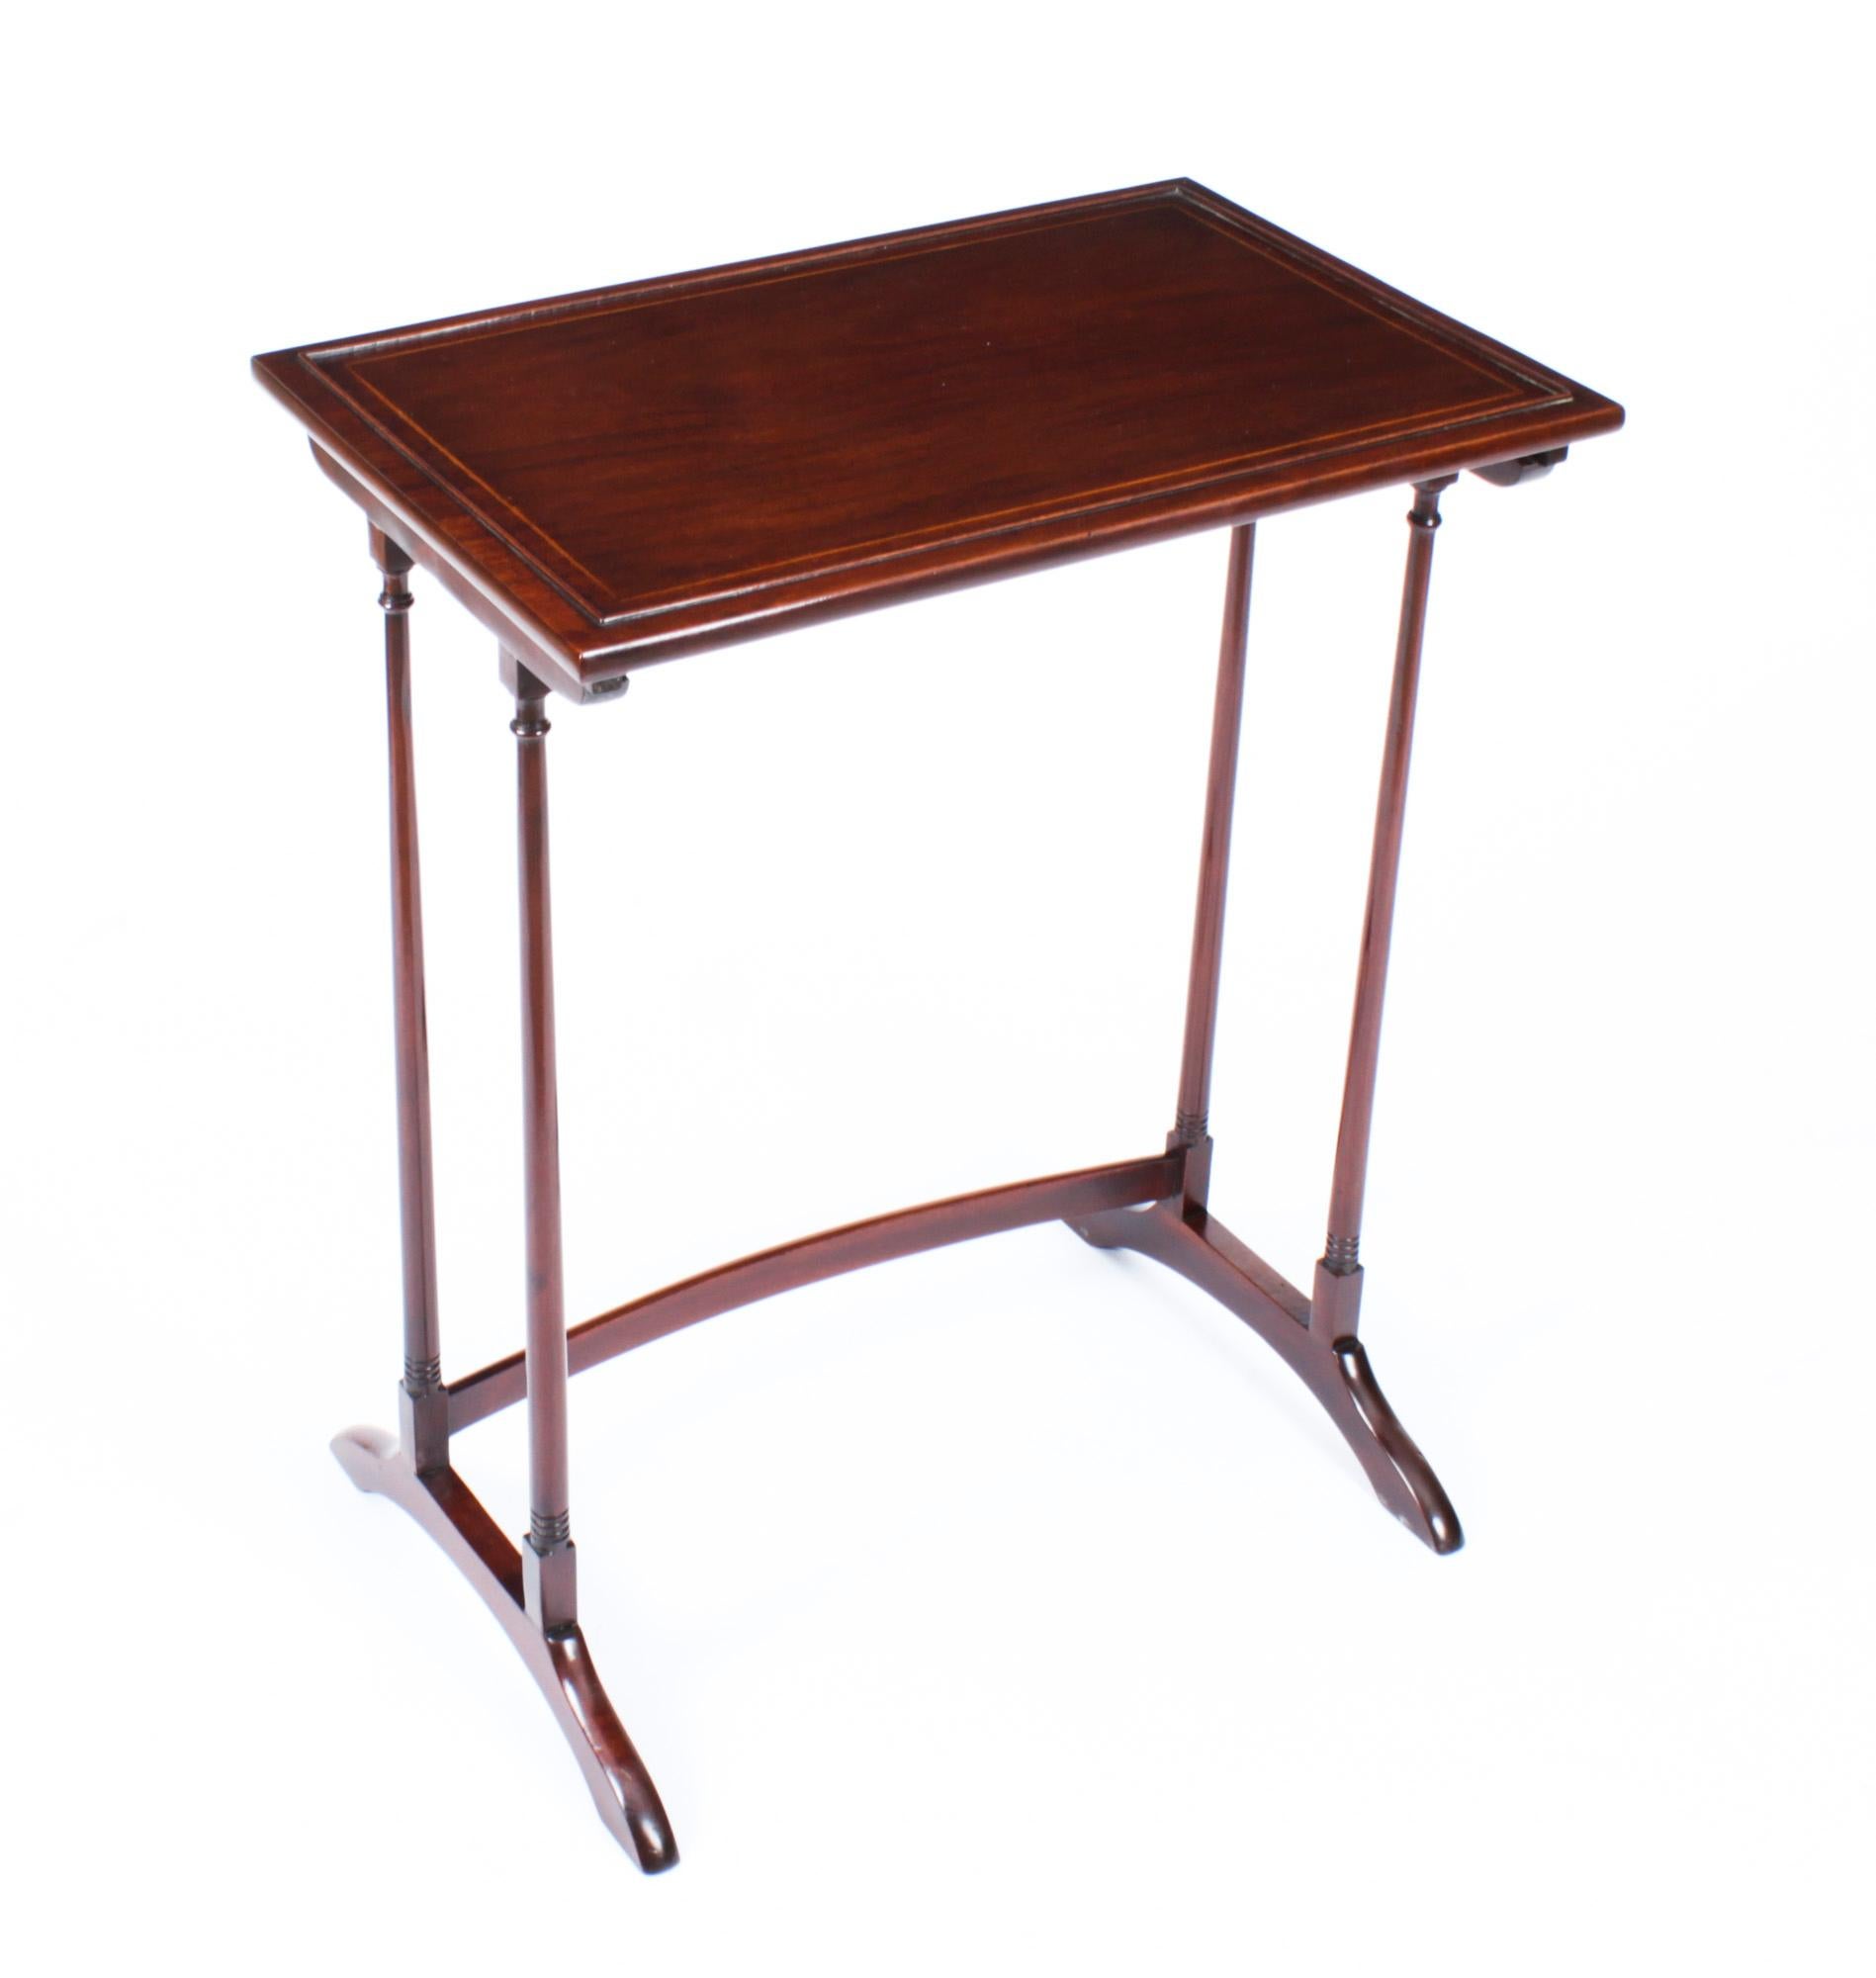 This is a beautiful antique Edwardian mahogany and satinwood banded nest of tables, circa 1900 in date. 
 
The nest consists of a set of four matching interlocking tables, the rich mahogany rectangular tops are all line inlaid in satinwood and